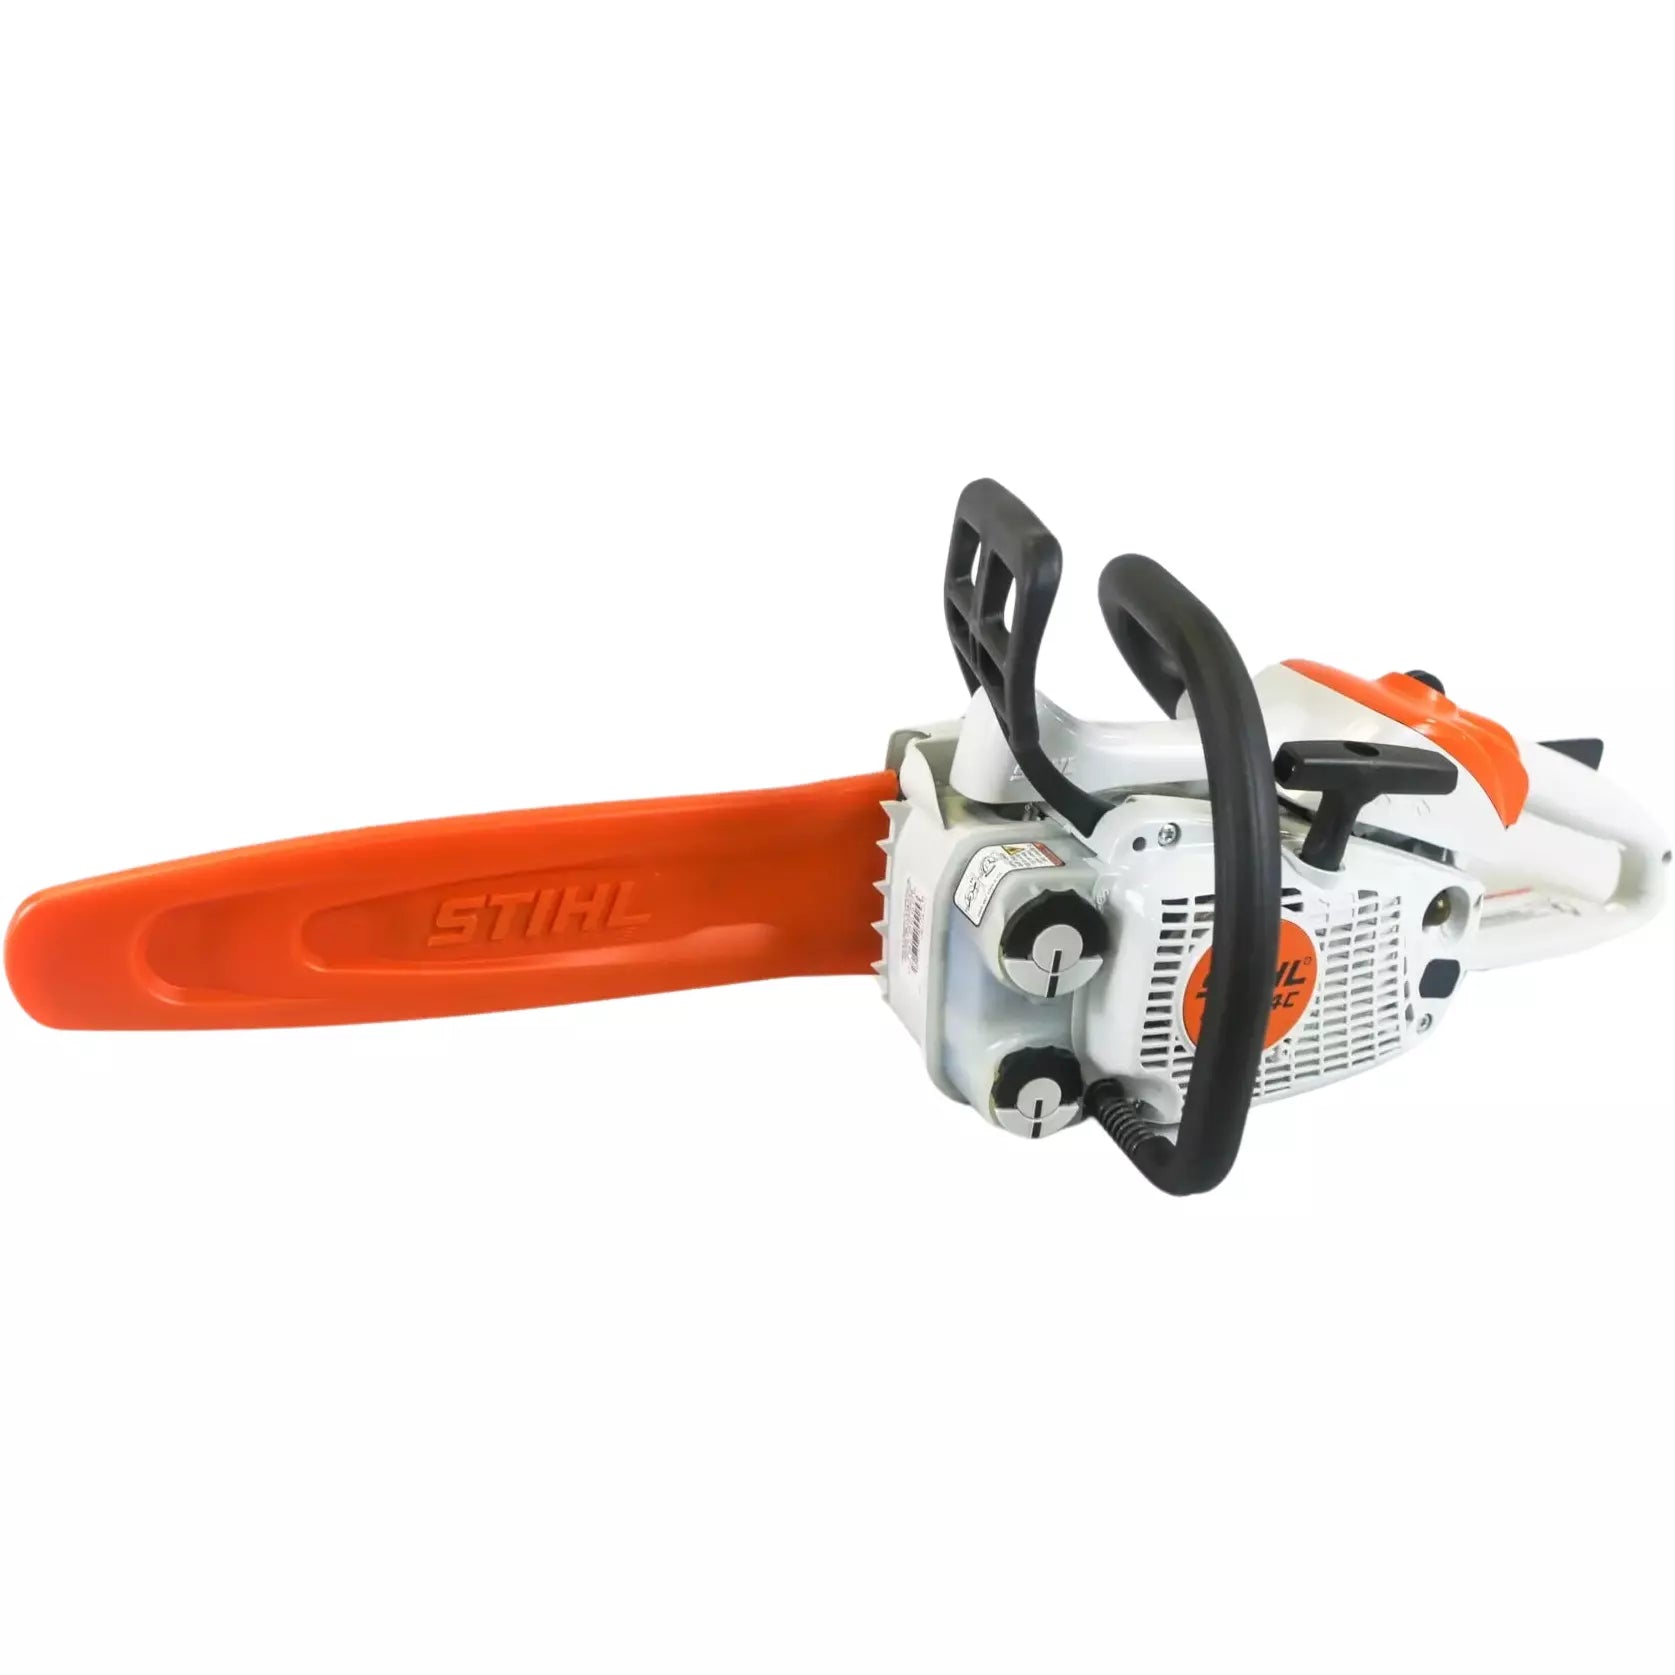 CHAINSAW, Stihl MS-194 T %5 OFF!!! Discounts @ CHECKOUT!!! FREE